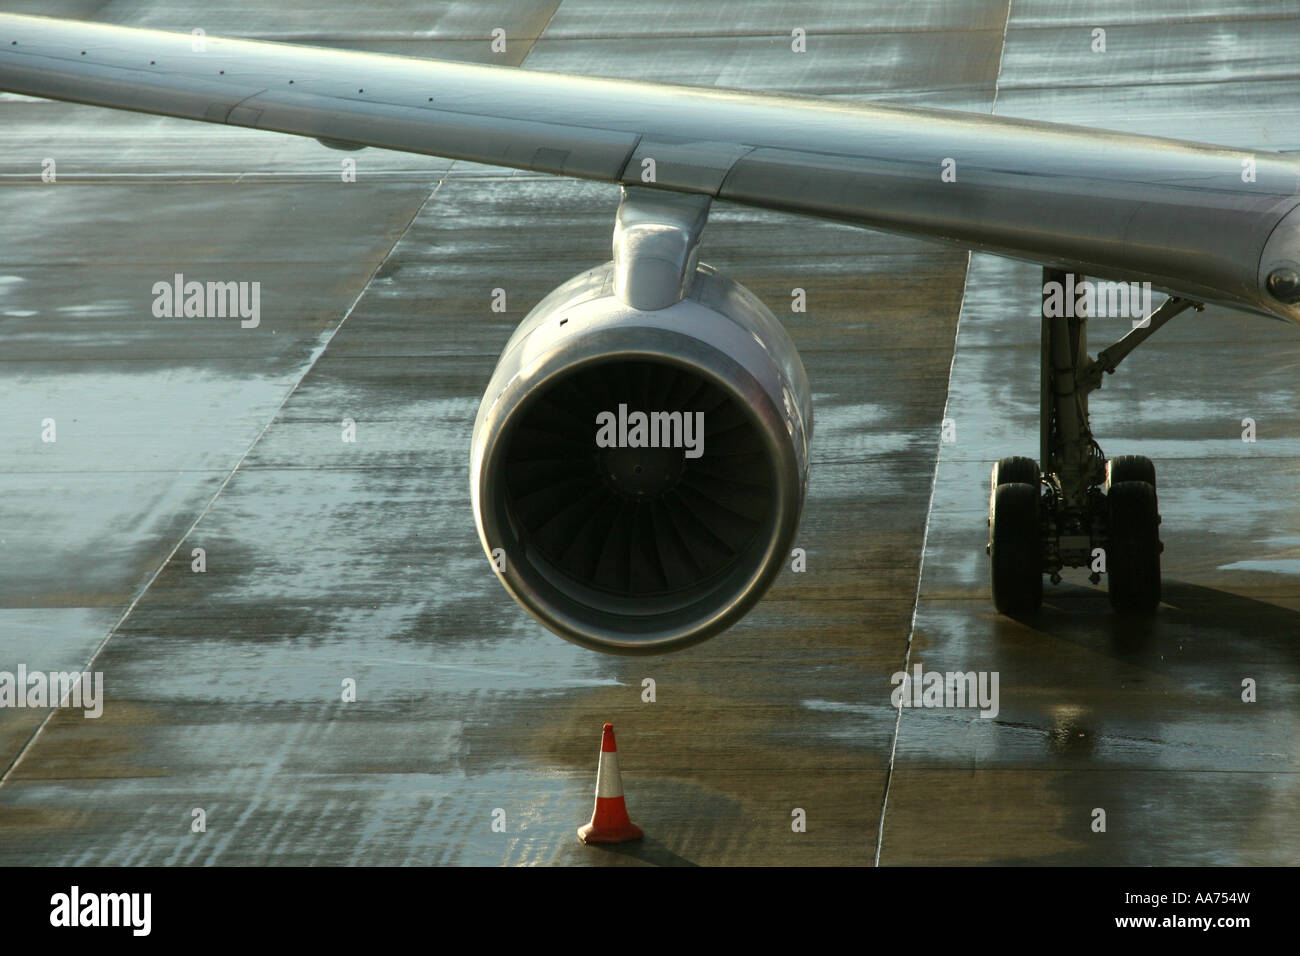 Rolls Royce RB211 Jet Engine on Thomson Fly Boeing 757 at Luton Airport Stock Photo